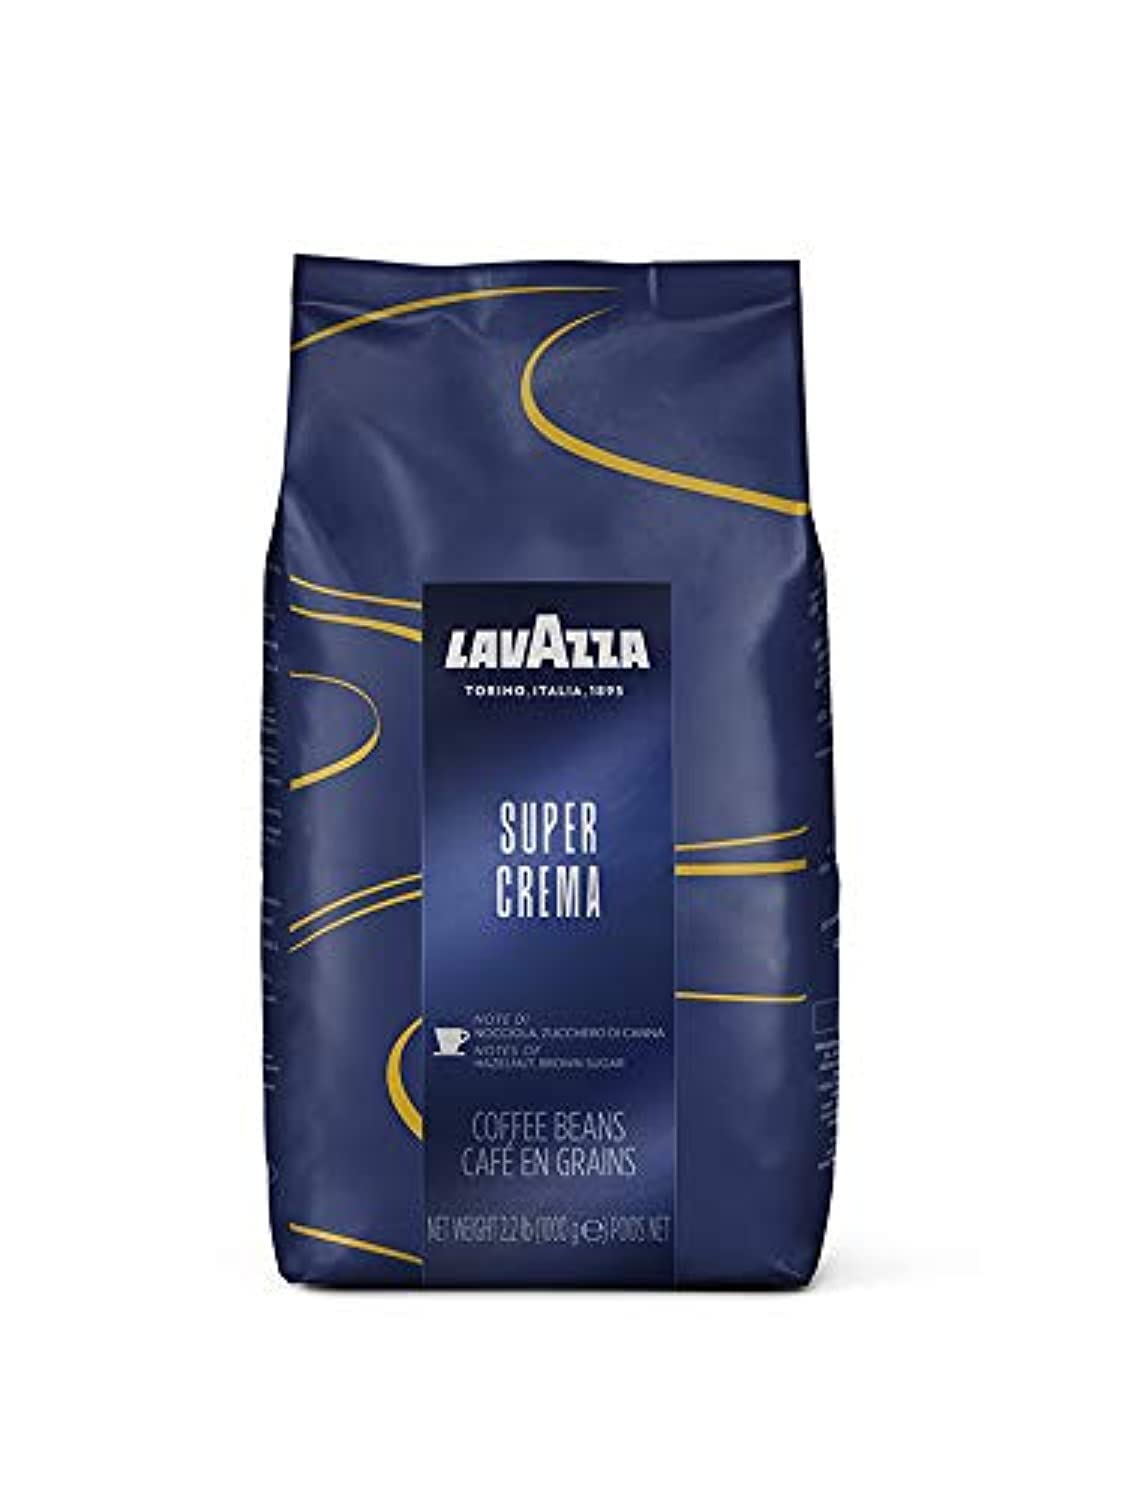 Lavazza Super Crema Whole Bean Coffee Blend, 2.2 Pound (Pack of 6) , Value Pack, Mild and creamy medium espresso roast with notes of hazelnut and brown sugar $68.13